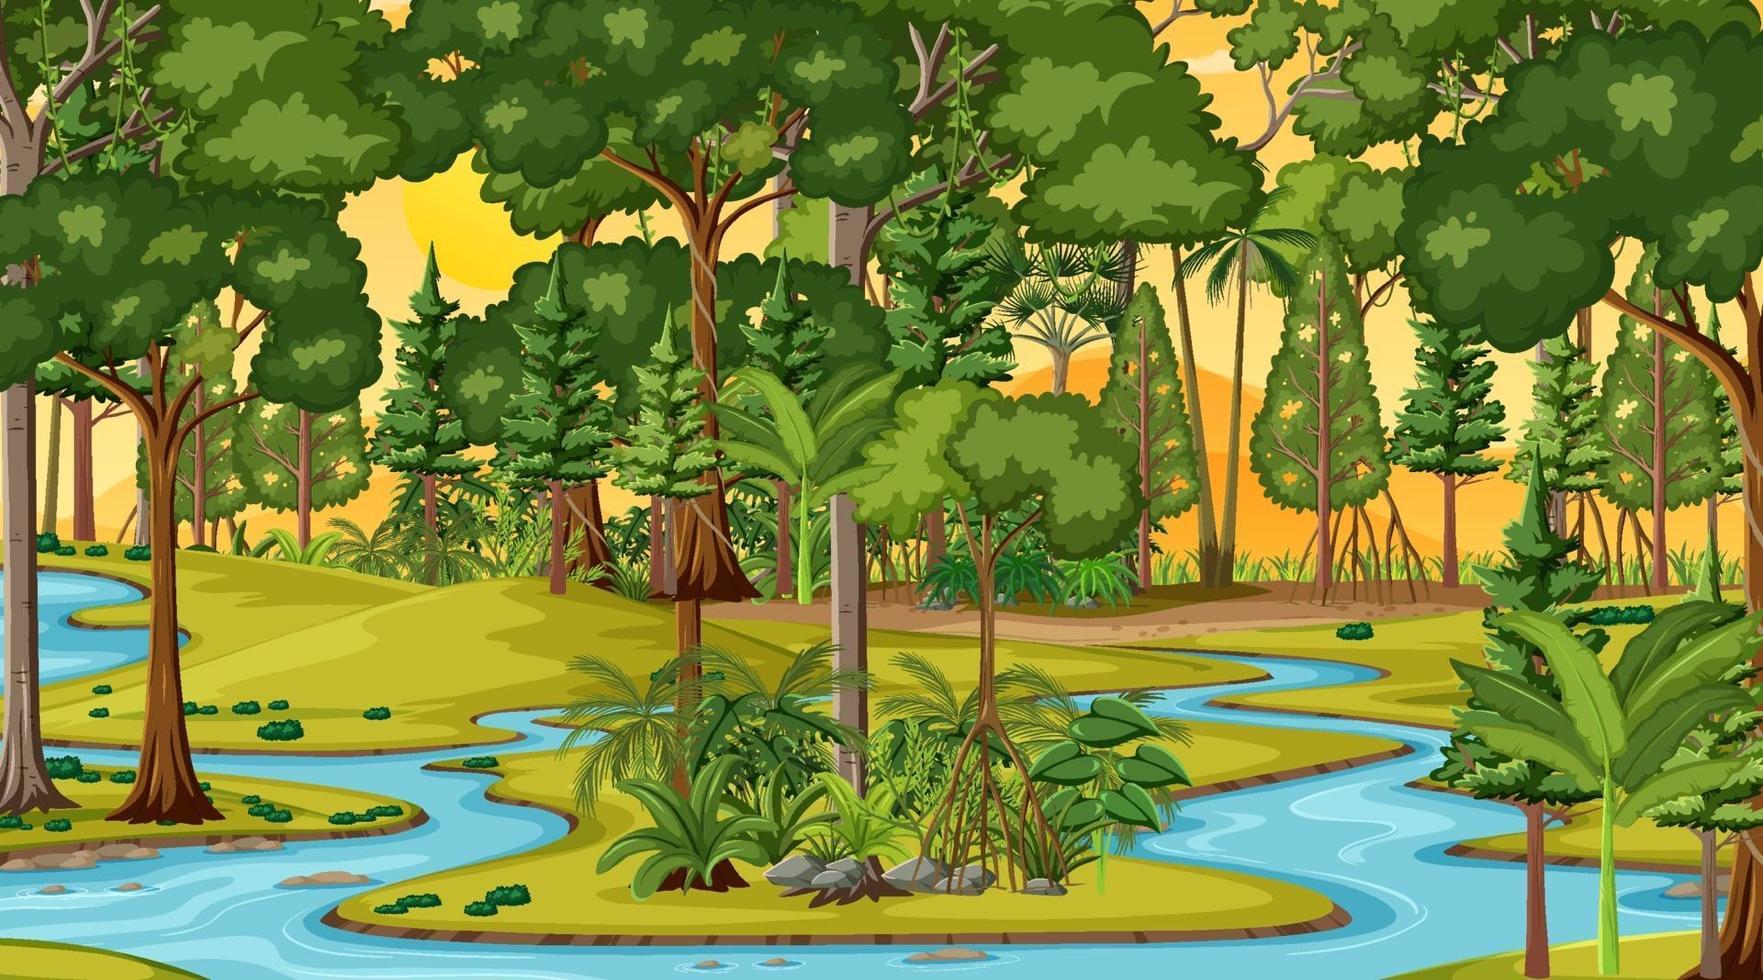 River along the forest scene at sunset time vector